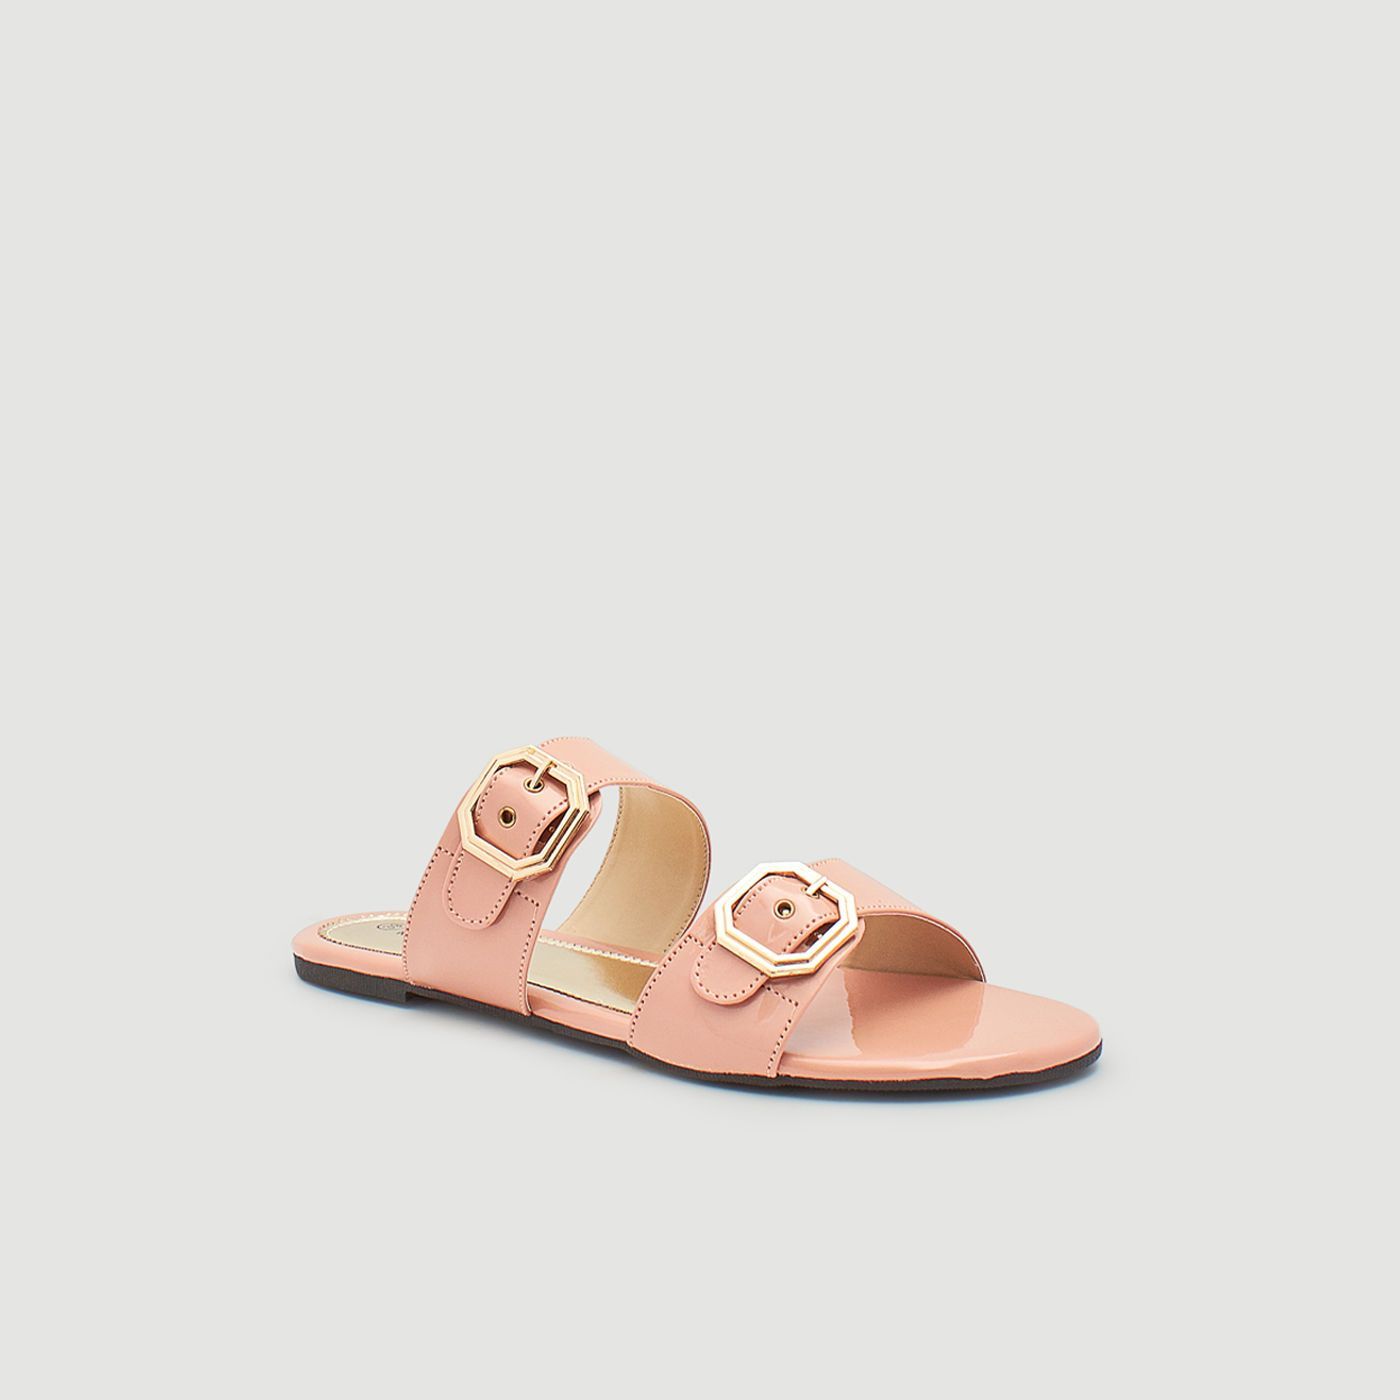 Buckled Thong Chappals